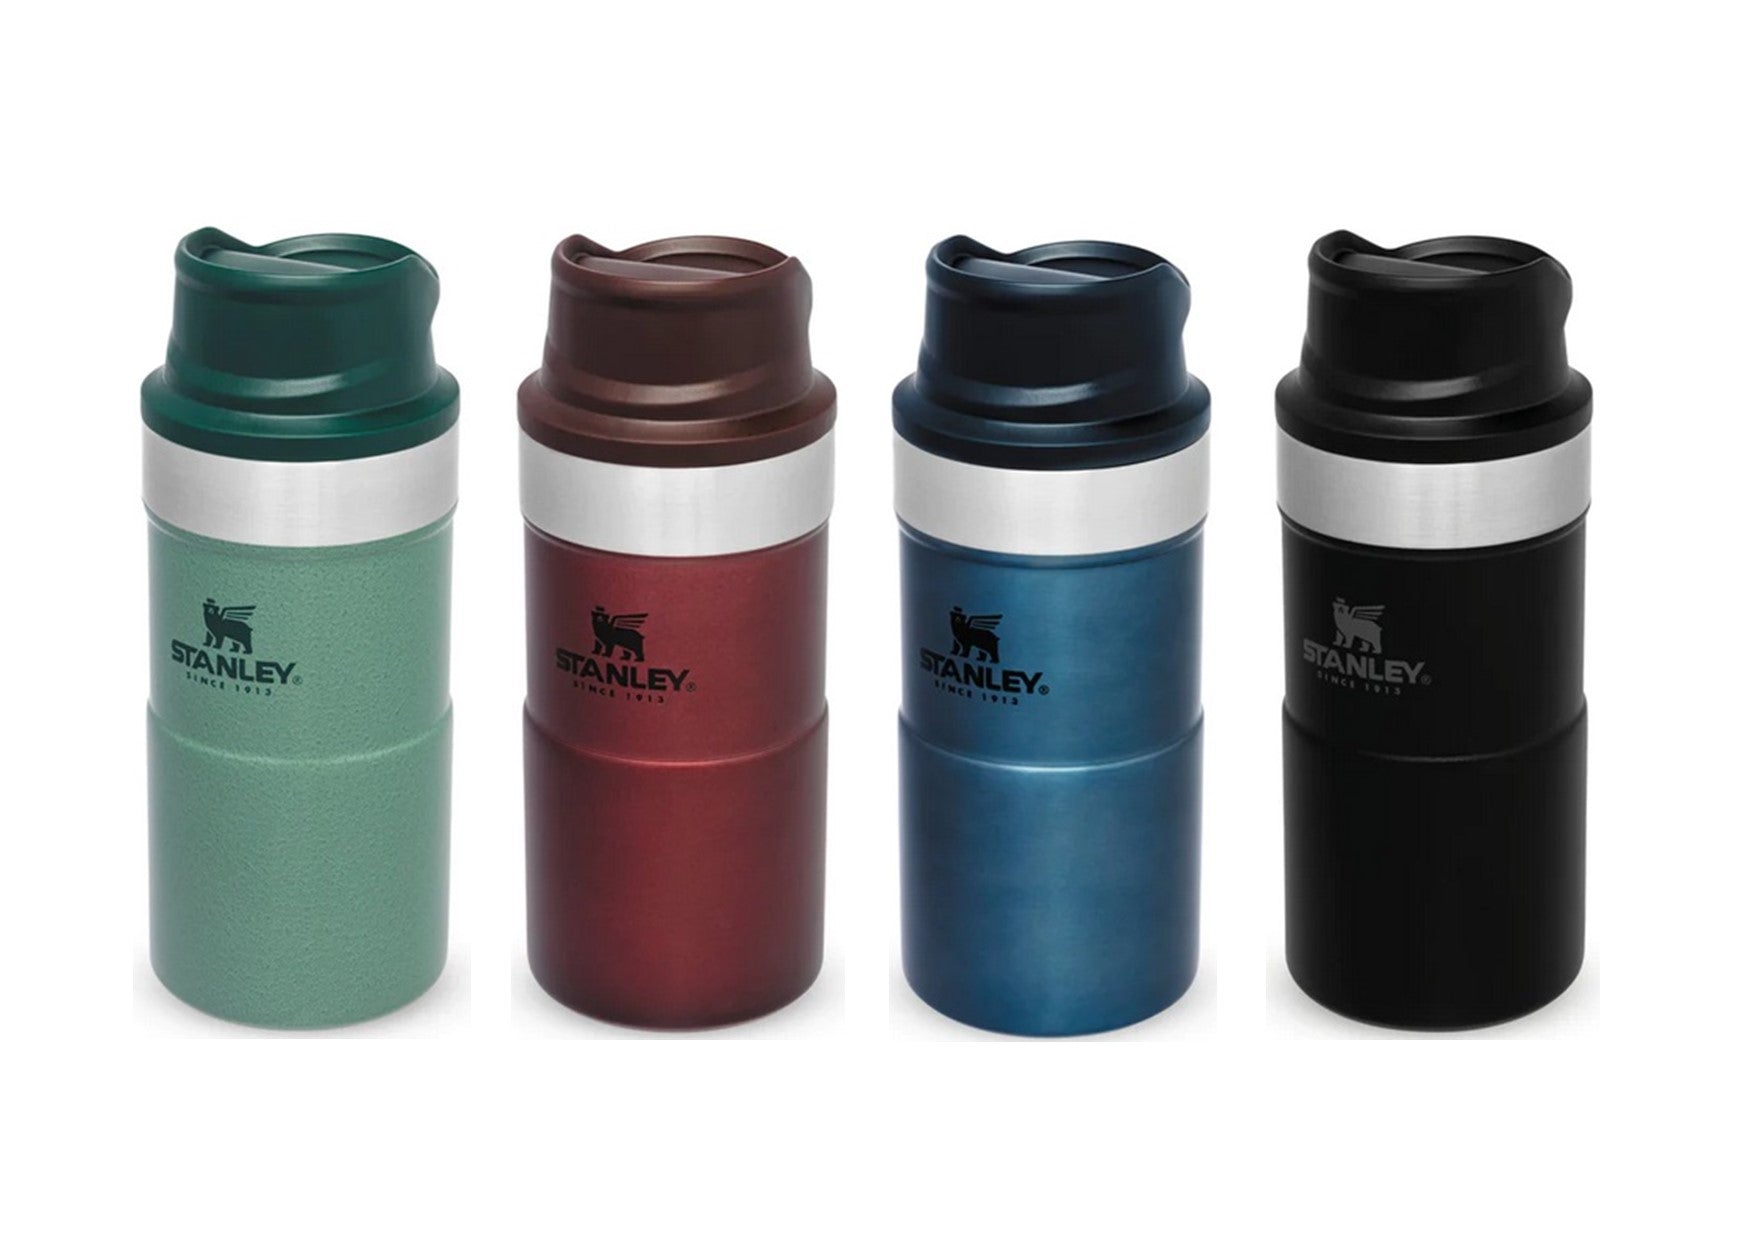 Stanley Trigger Action Travel Thermos Mug 0.35L / 12OZ Hammertone Green  Leakproof Tumbler for Coffee Tea and Water BPA FREE